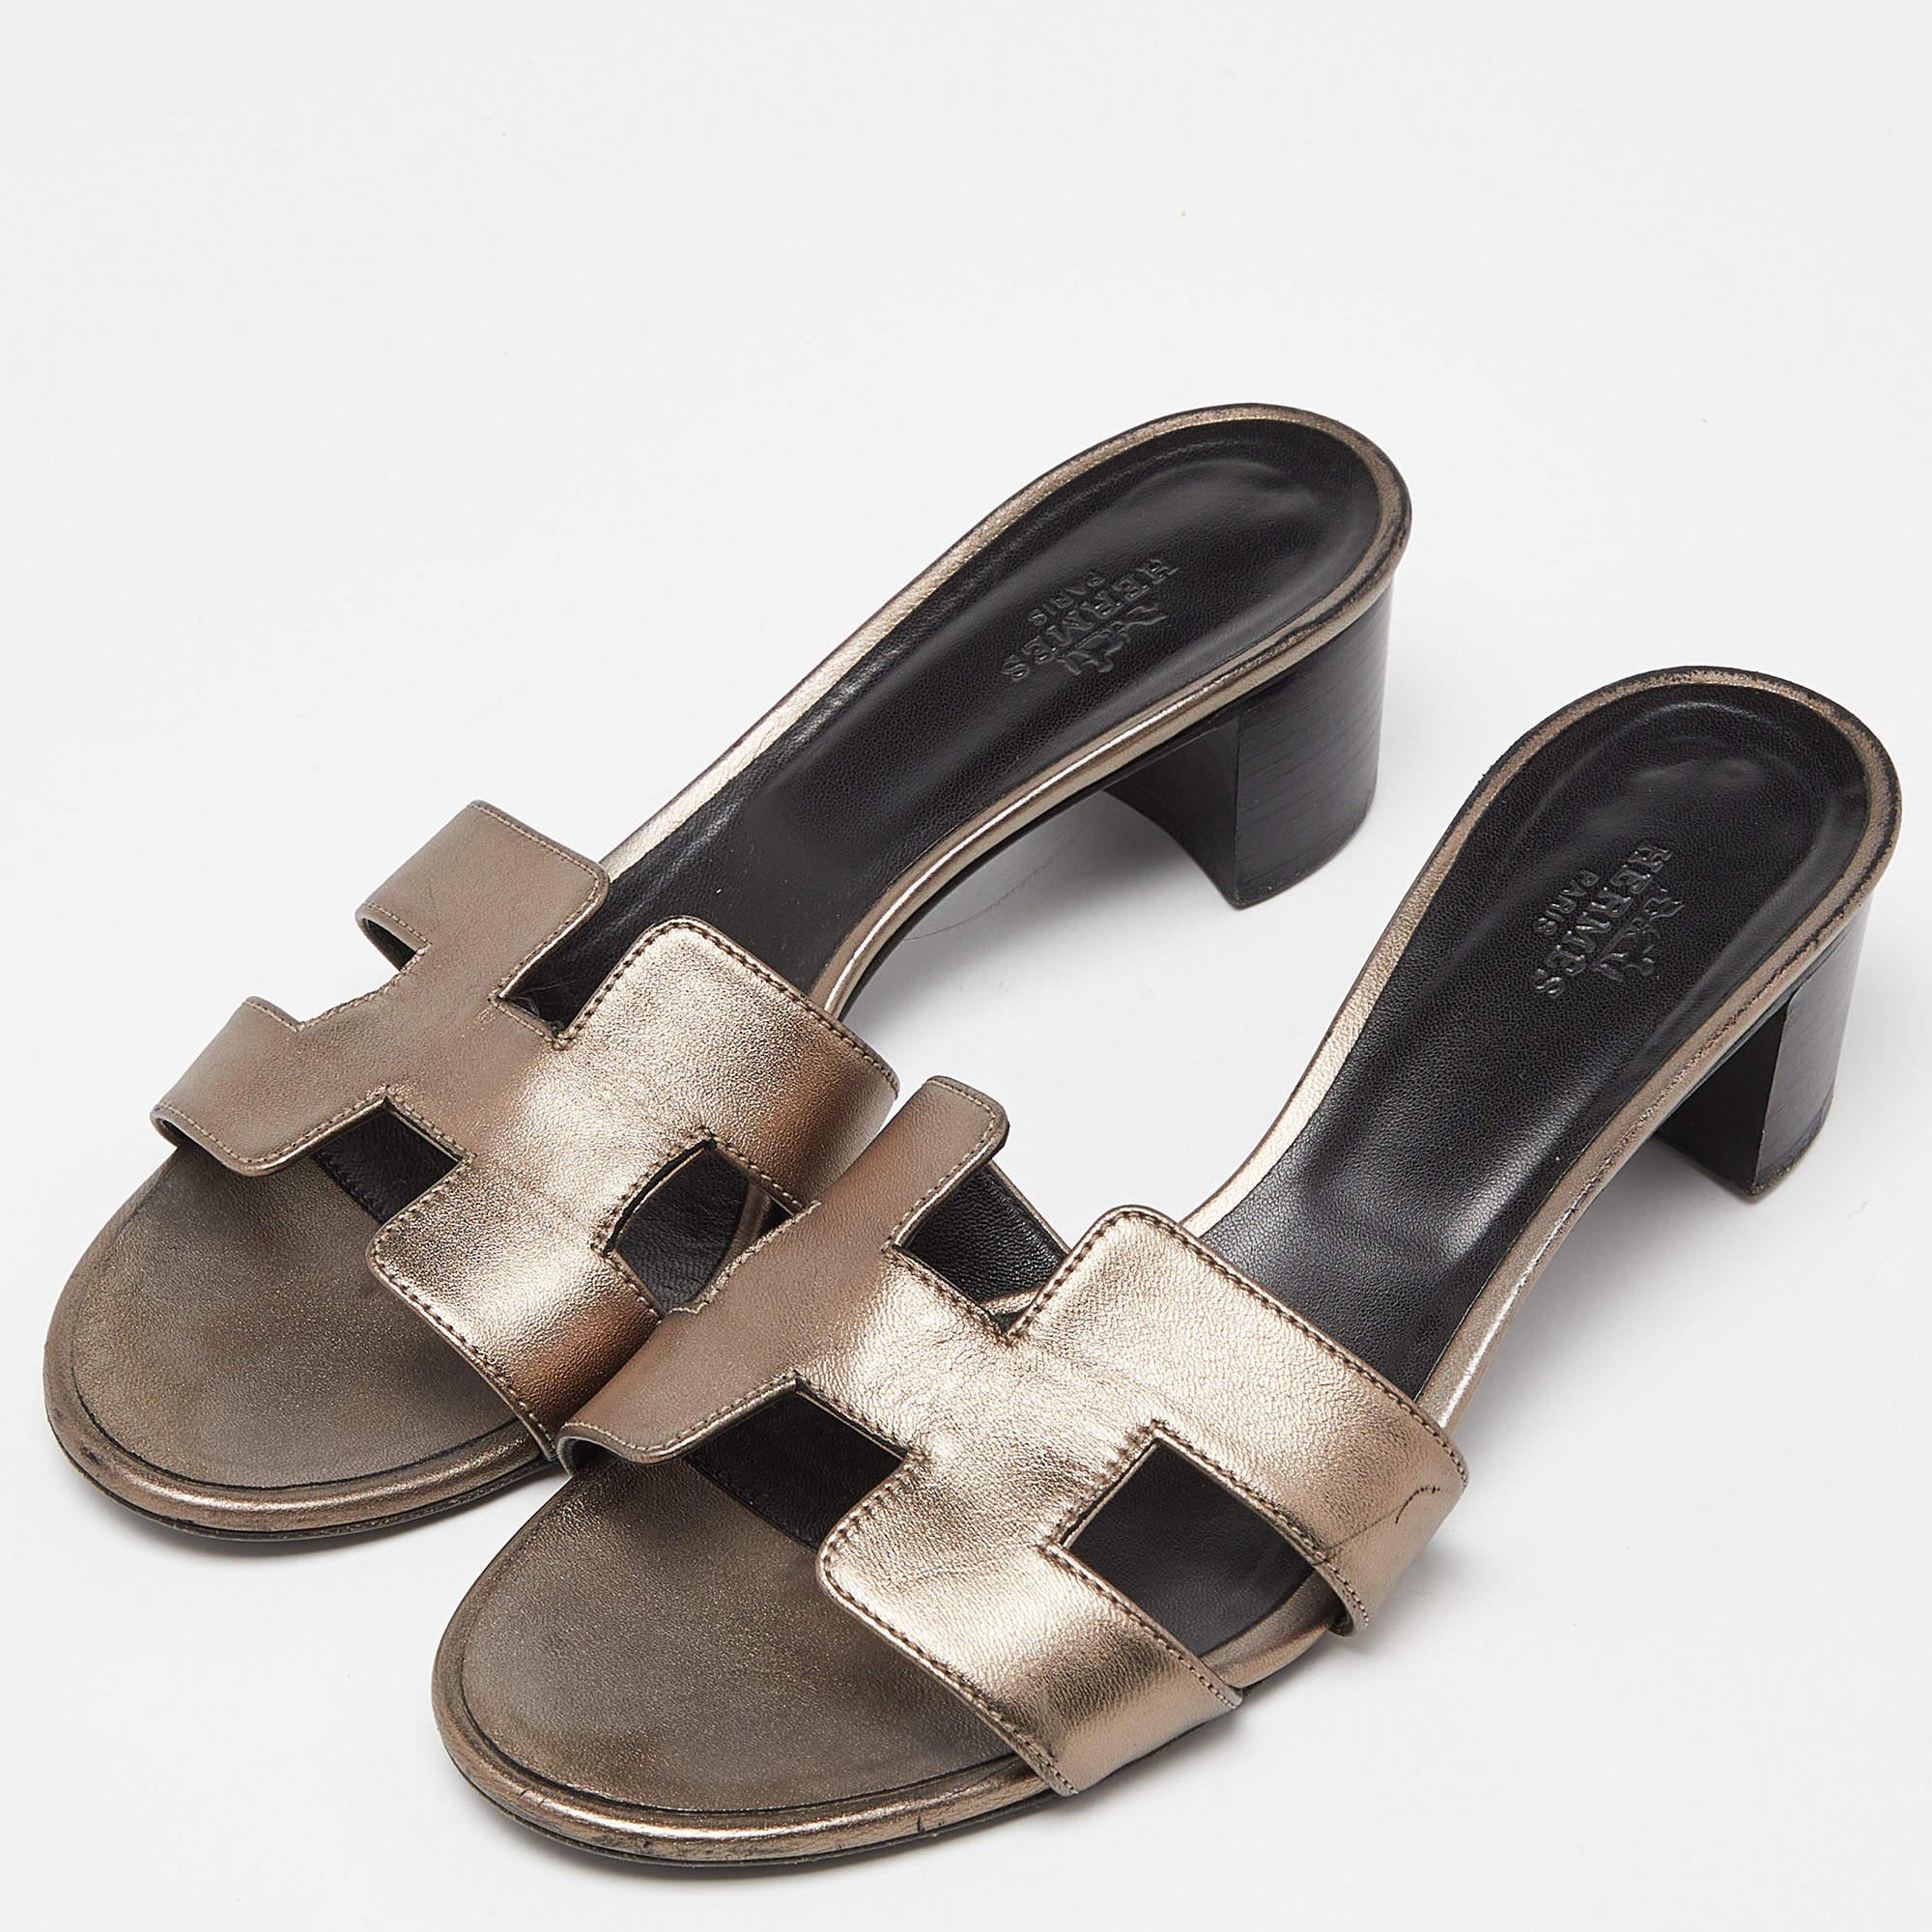 Elevate your ensemble with these Hermes slides for women. Meticulously crafted, these exquisite heels exude luxury and style. A statement of grace and confidence, perfect for any occasion.

Includes: Original Dustbag